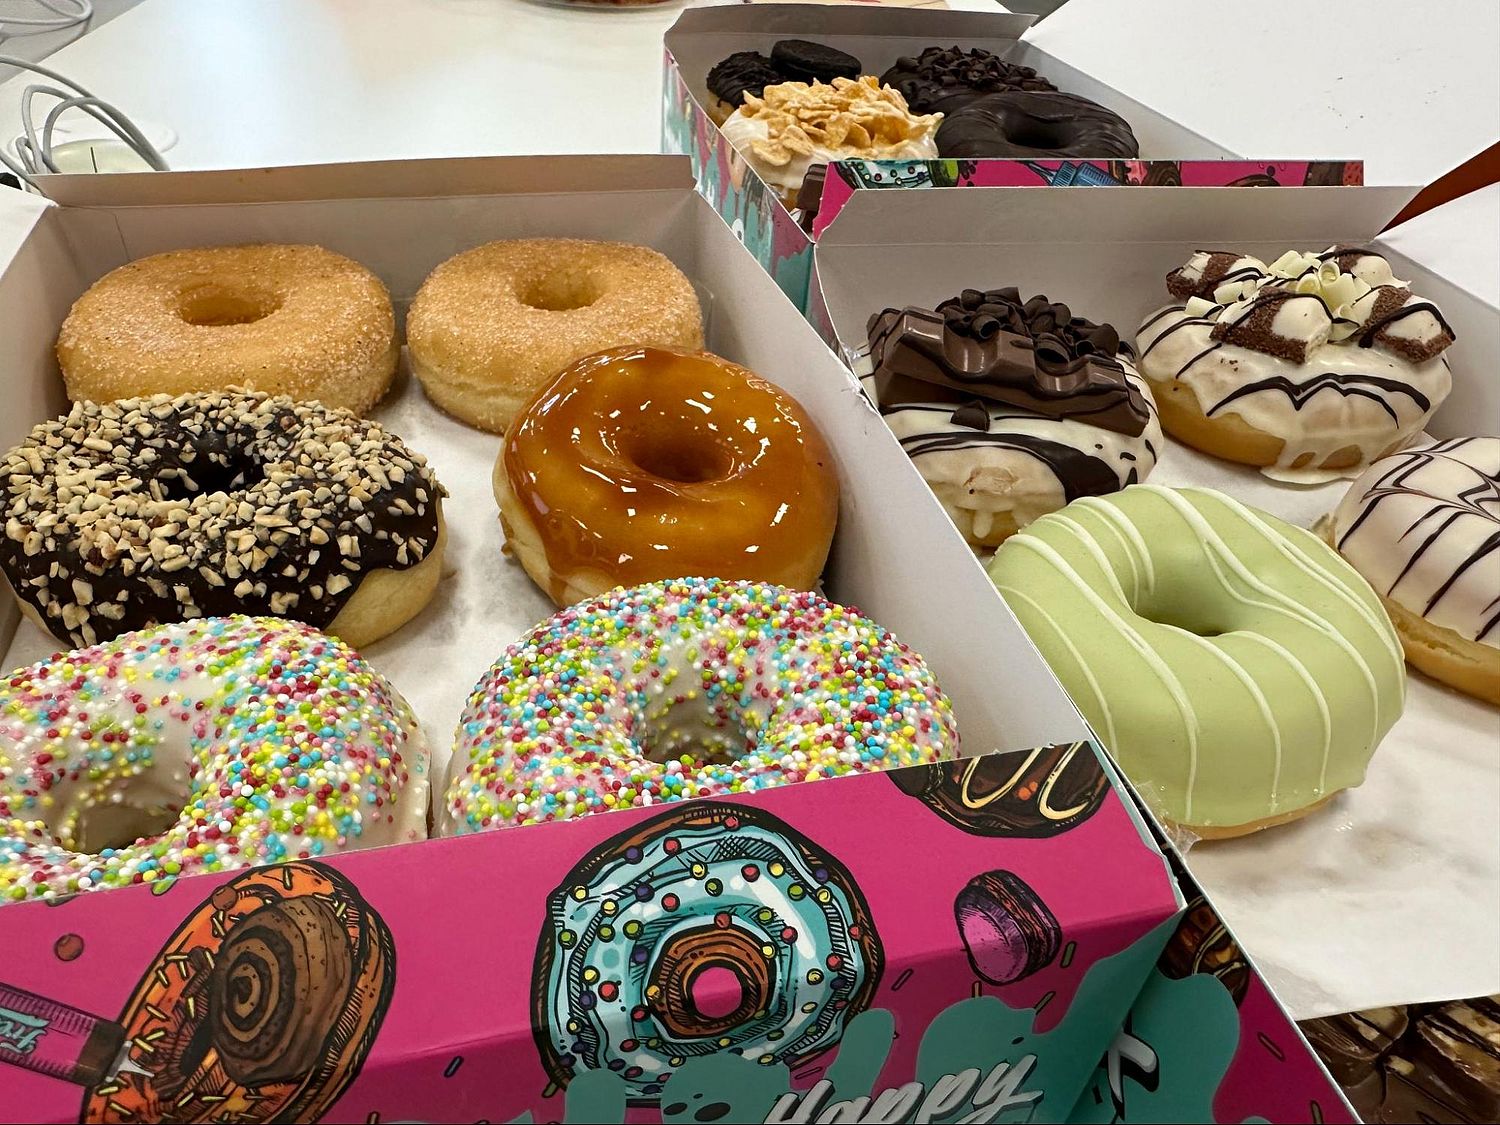 Donuts of different colors in paper boxes.